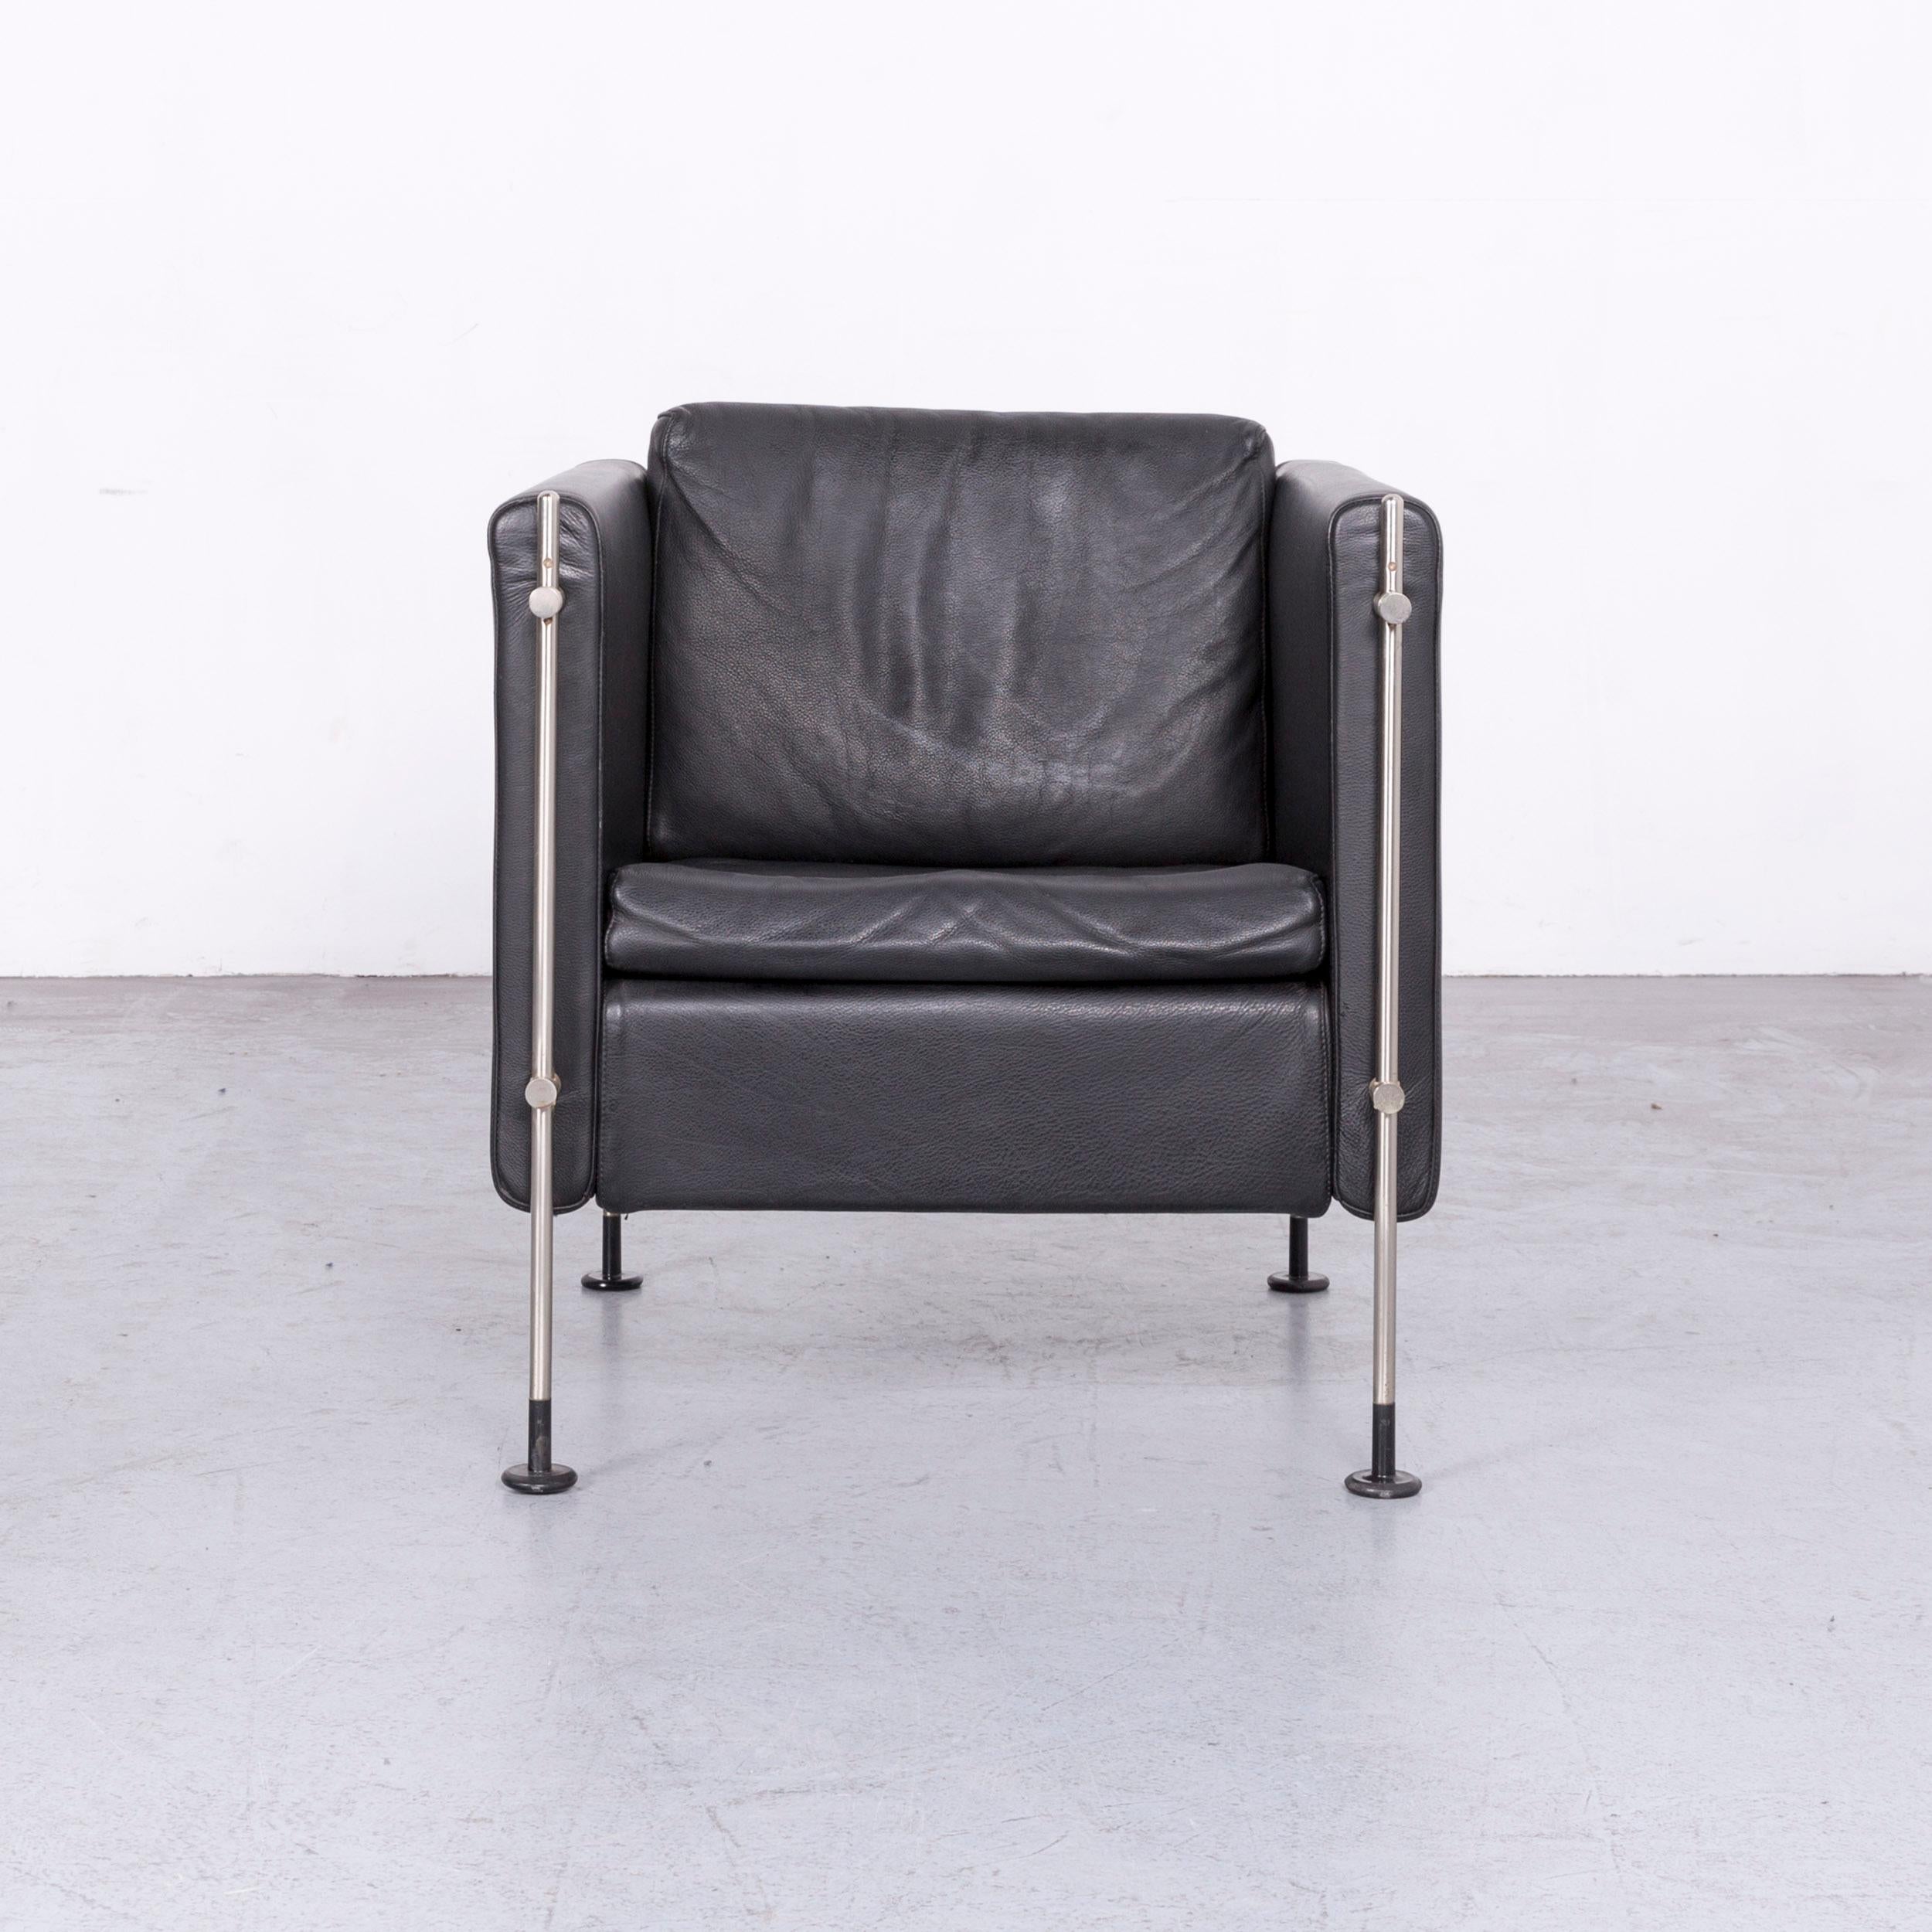 We bring to you a Arflex Felix leather armchair black one-seat chair.

































